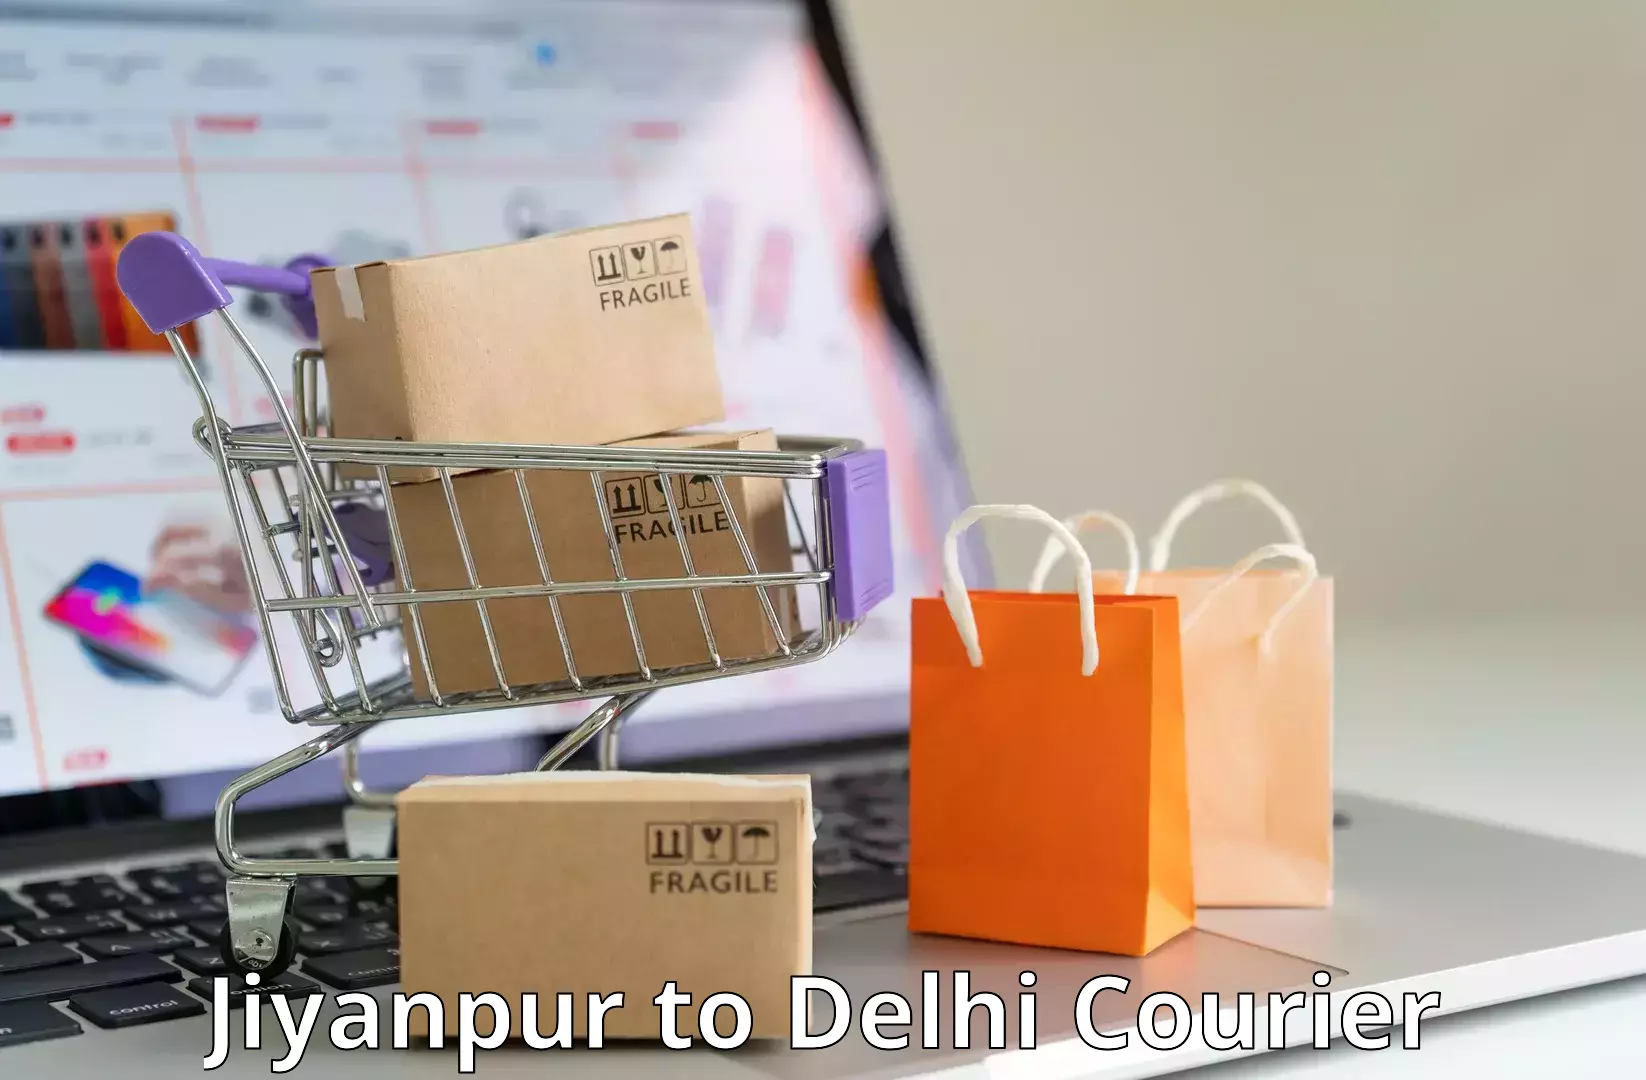 Tailored freight services Jiyanpur to University of Delhi